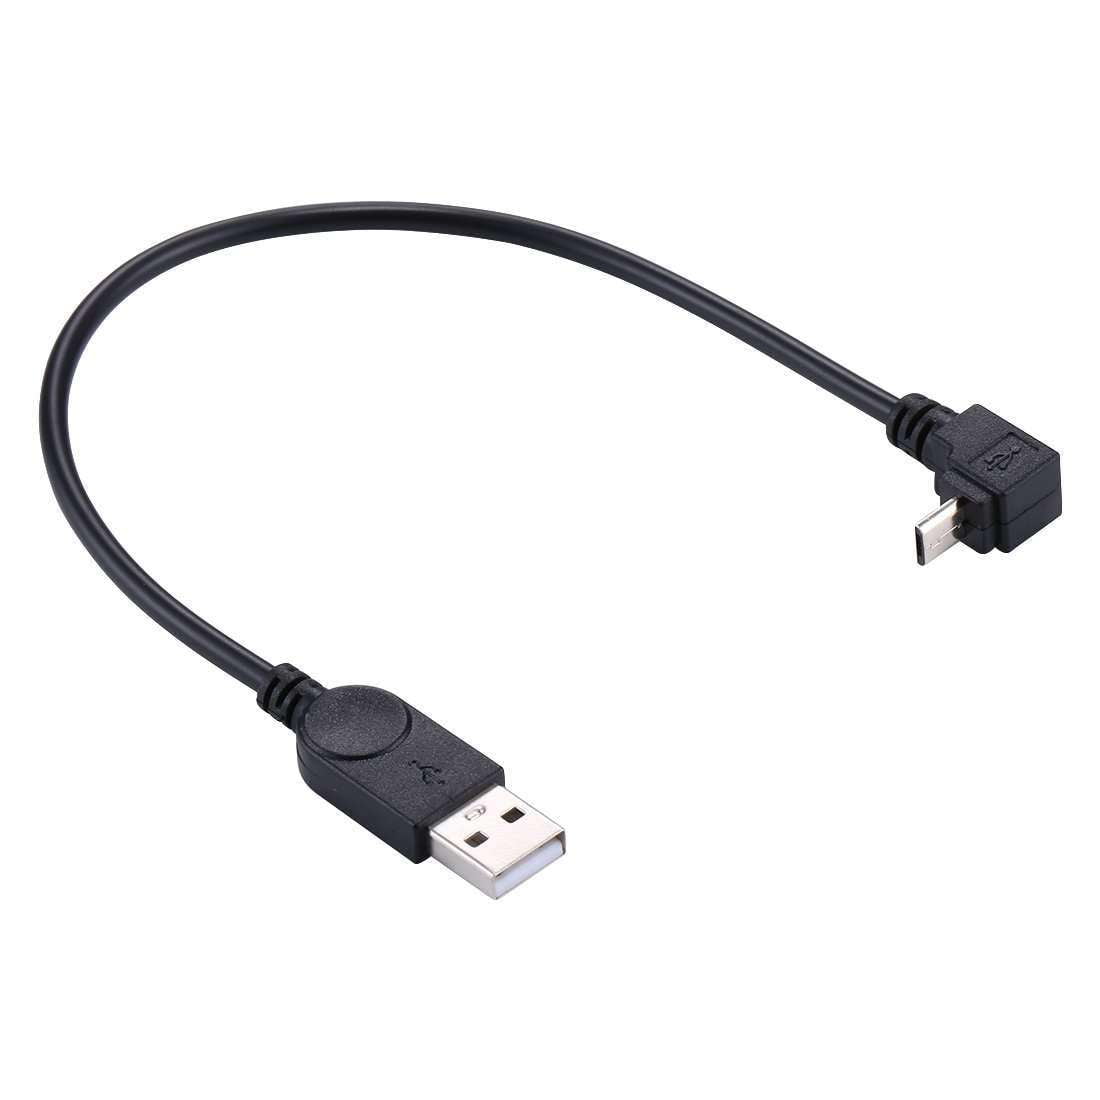 PRO OTG Cable Works for ZTE Sonata 2 Right Angle Cable Connects You to Any Compatible USB Device with MicroUSB 